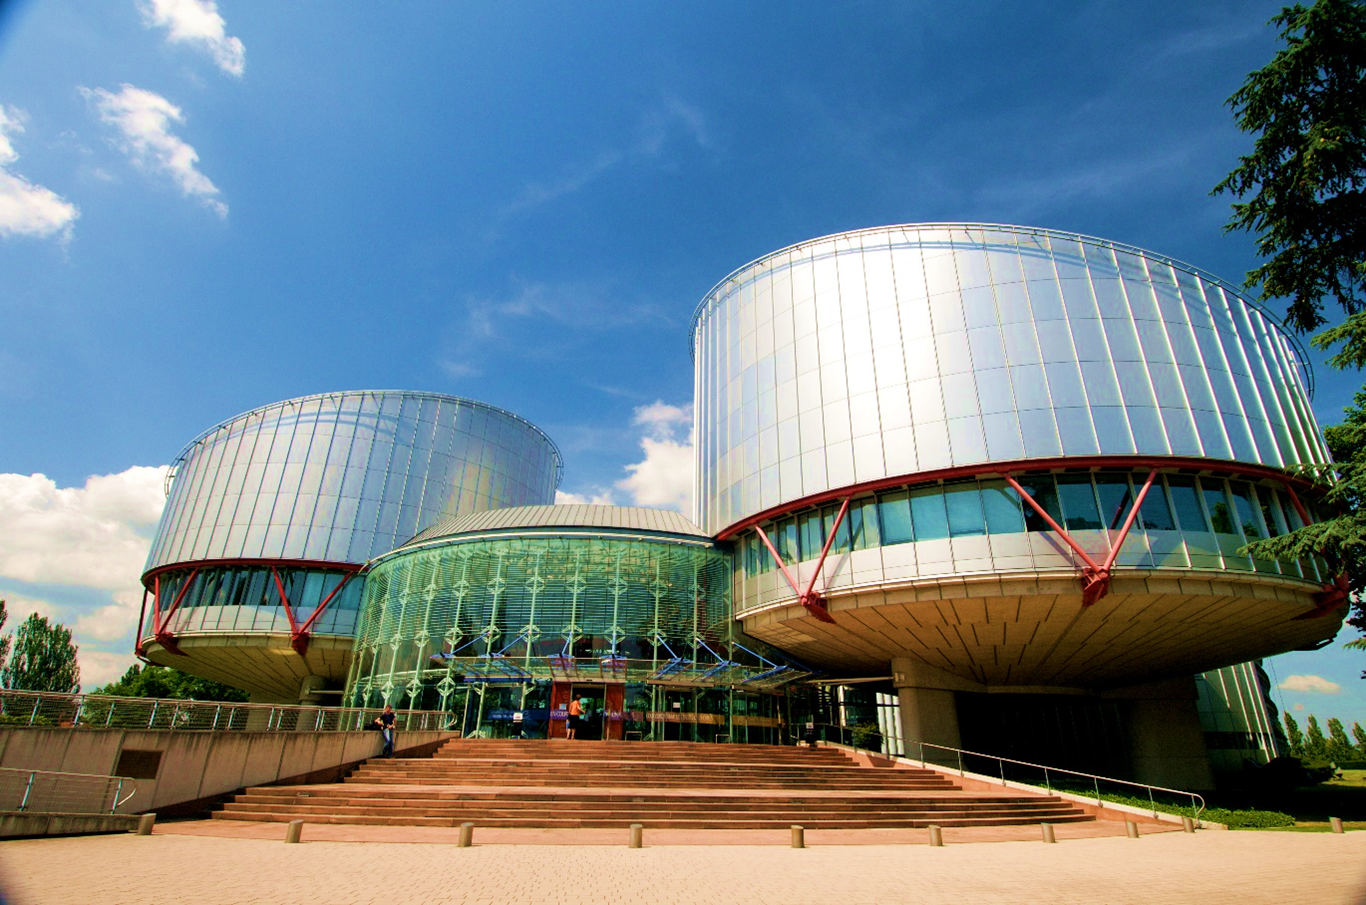 Noteworthy case-law from the European Court of Human Rights